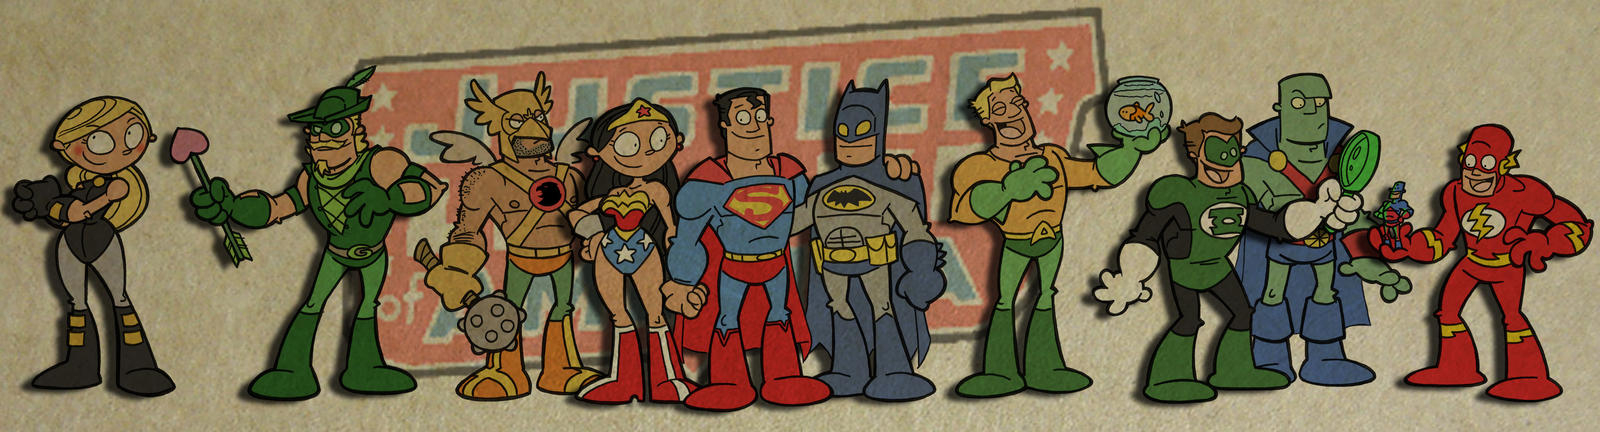 The League of Superfriends